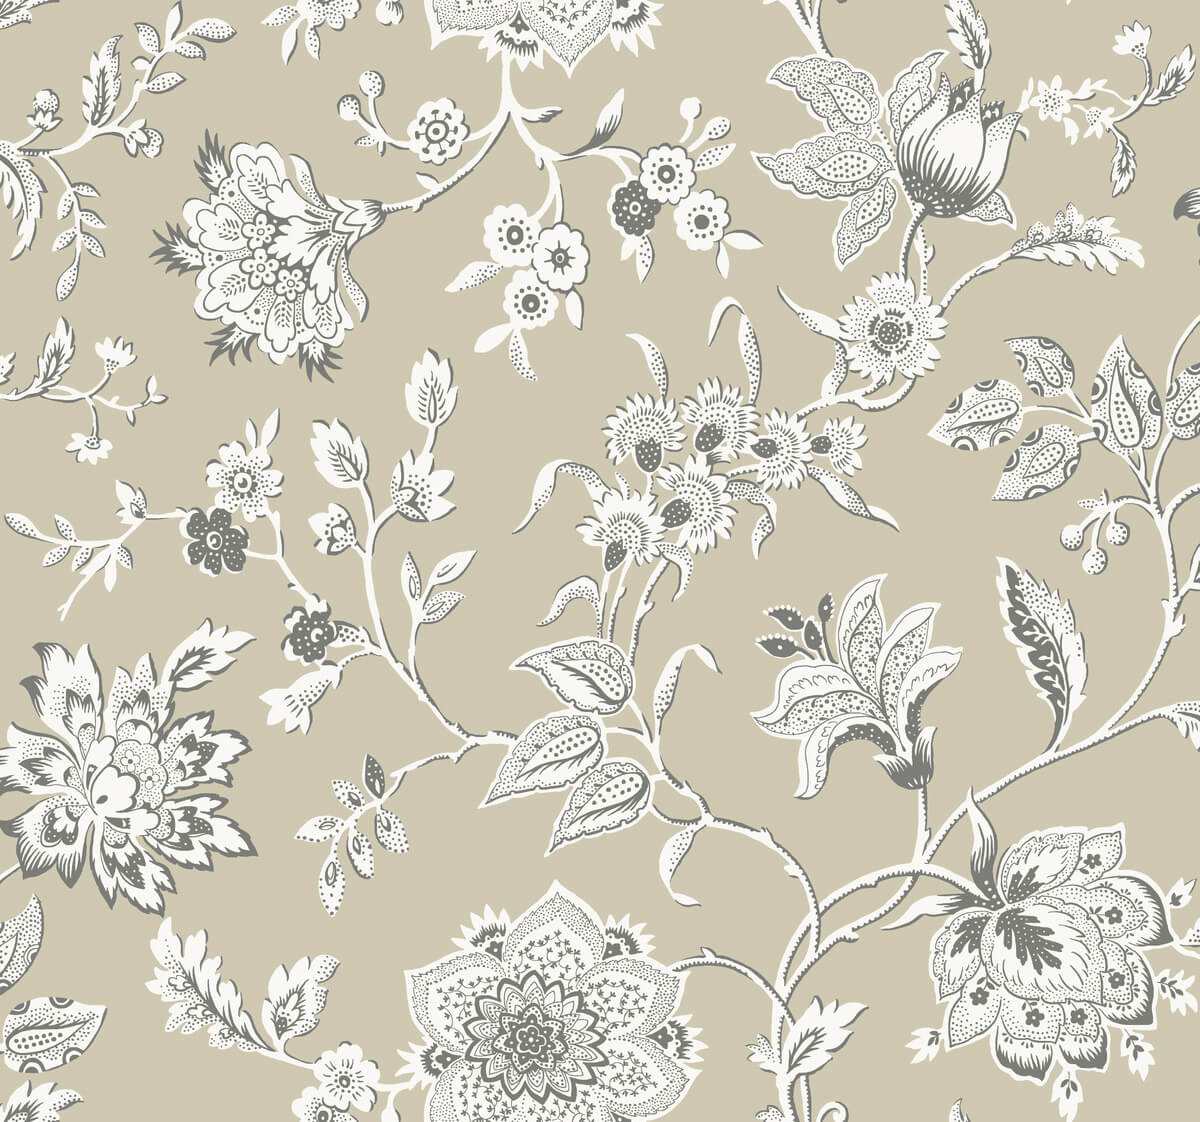 Toile Resource Library Wallpaper Collection - SAMPLE